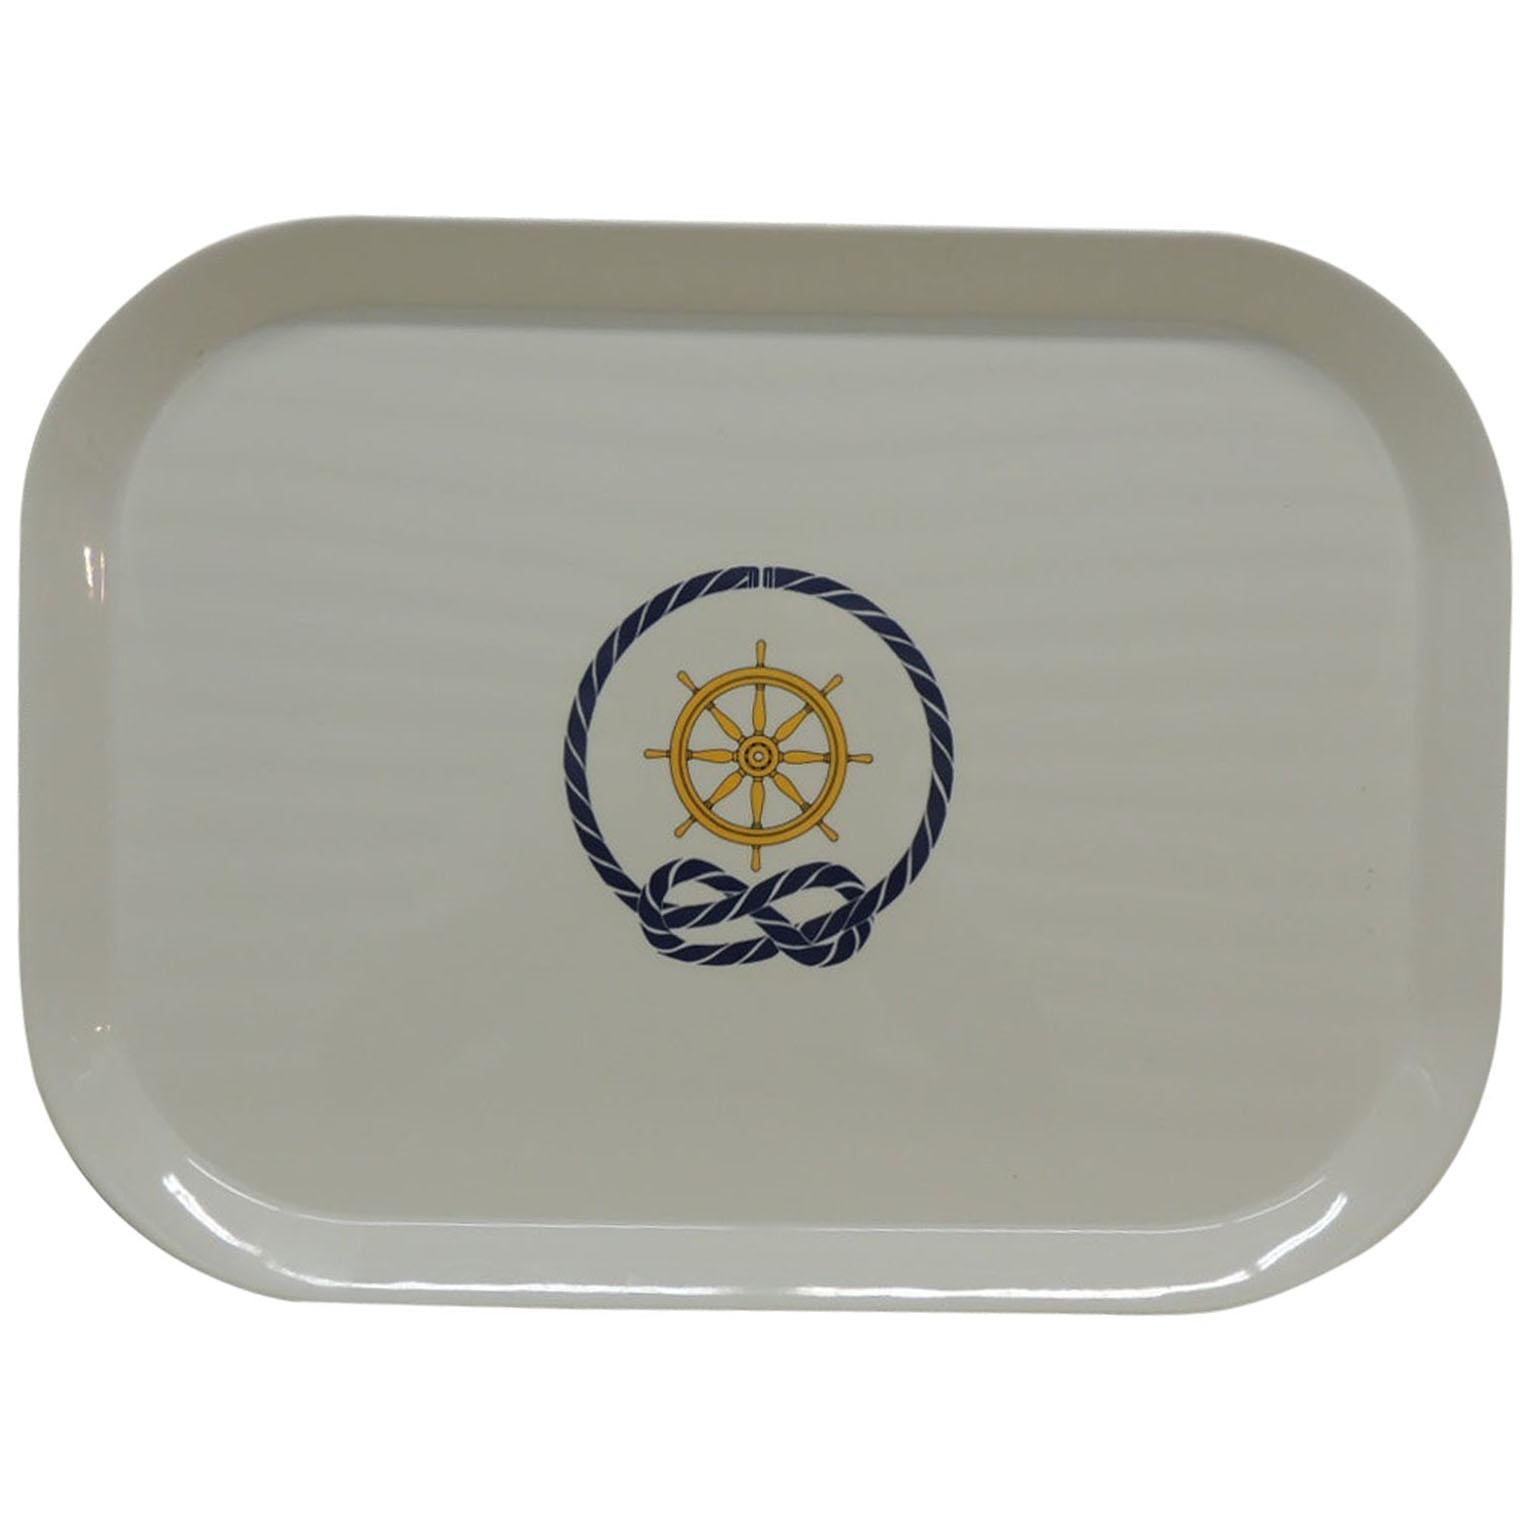 Blue and White Nautical Theme Oval Serving Tray